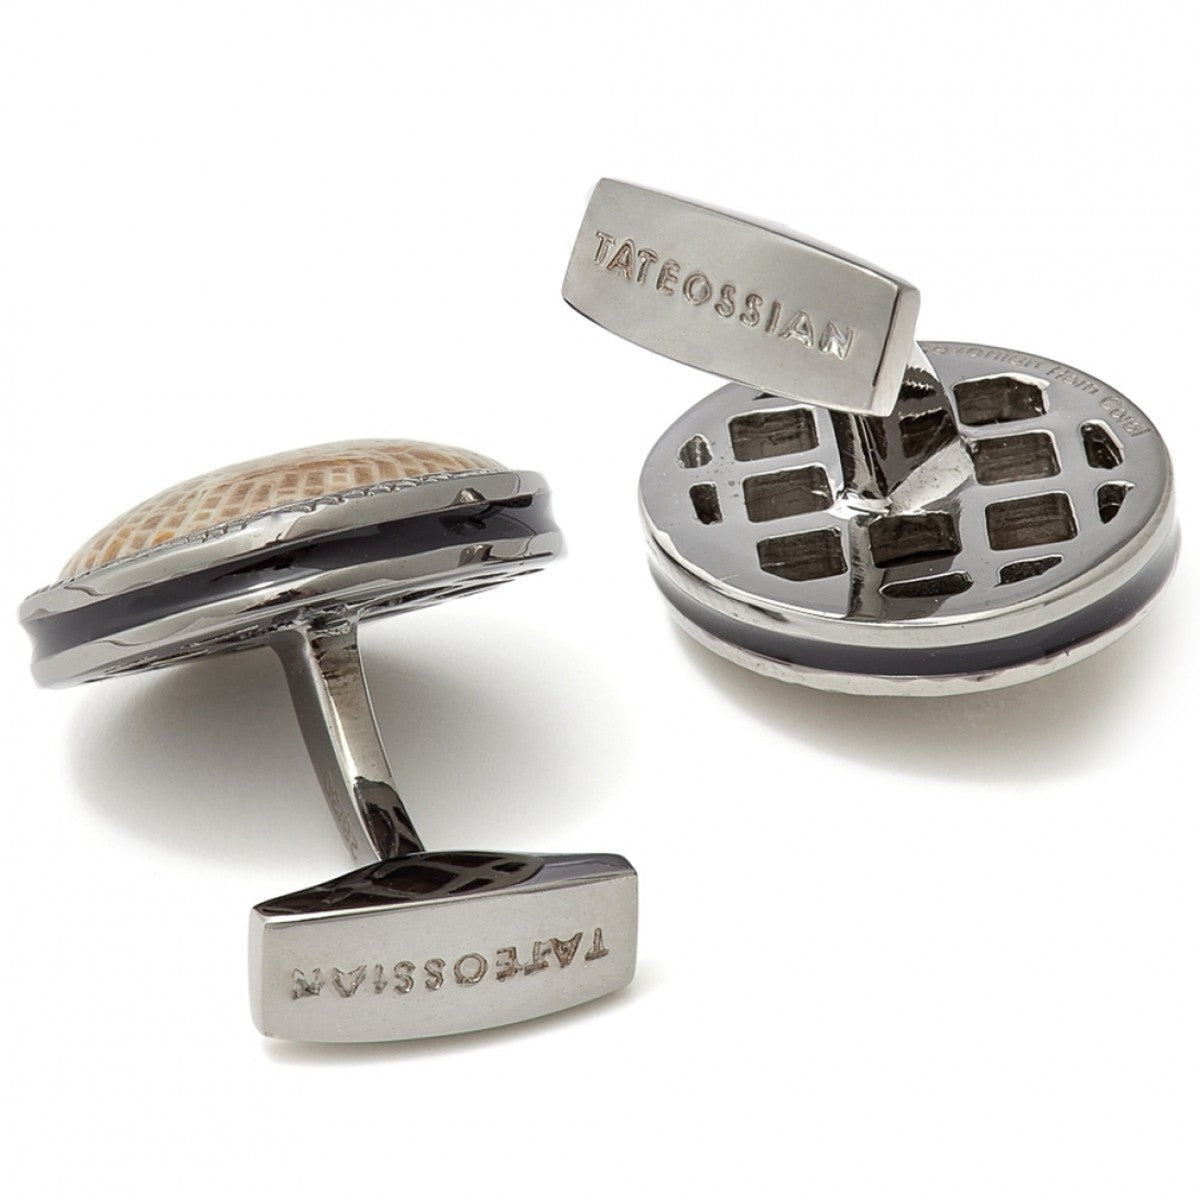 Tateossian Devonian Horn Coral Limited Edition Sterling Silver Cufflinks, Black